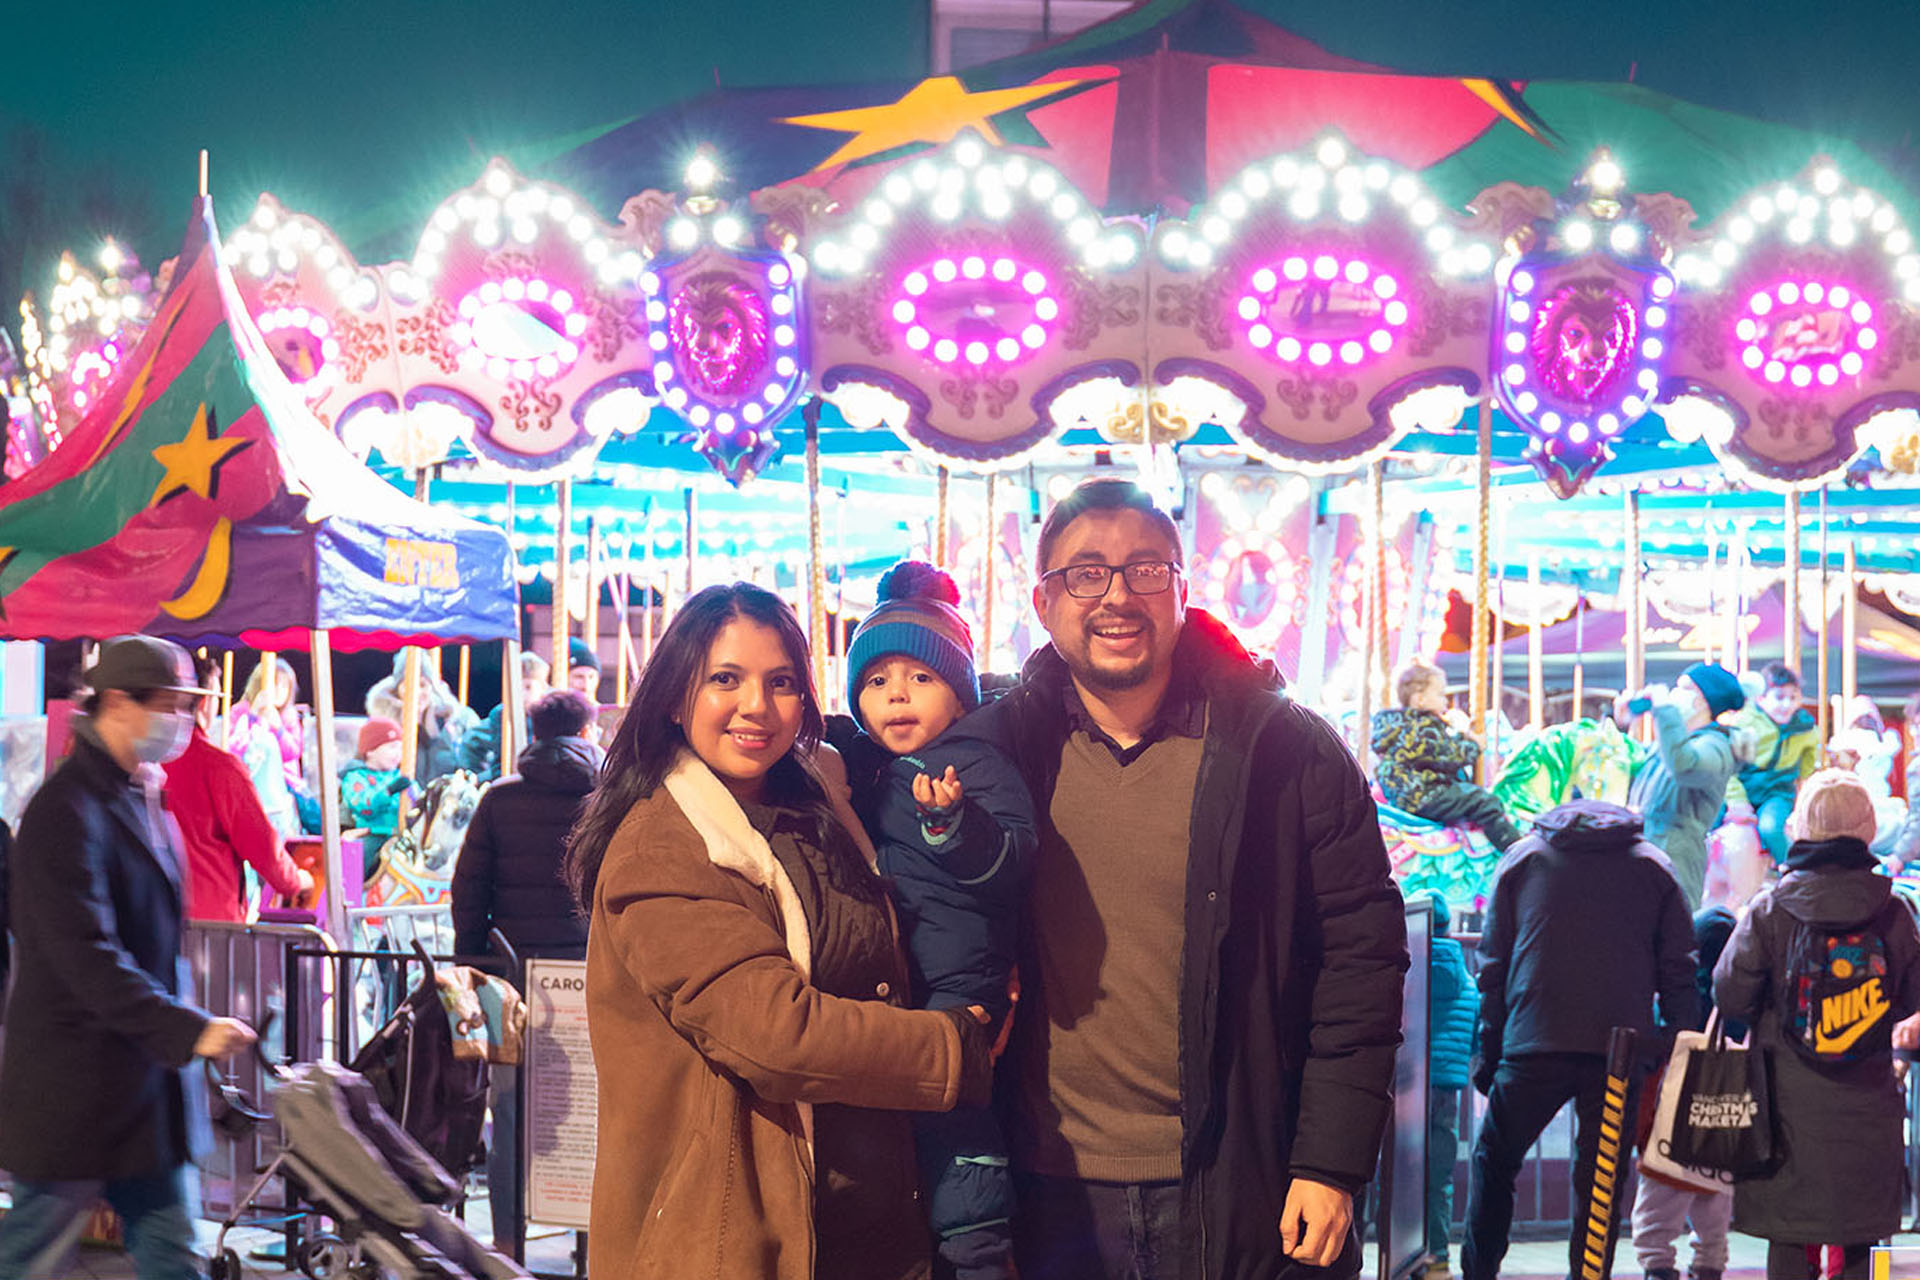 A family standing in front of a merry-go-round